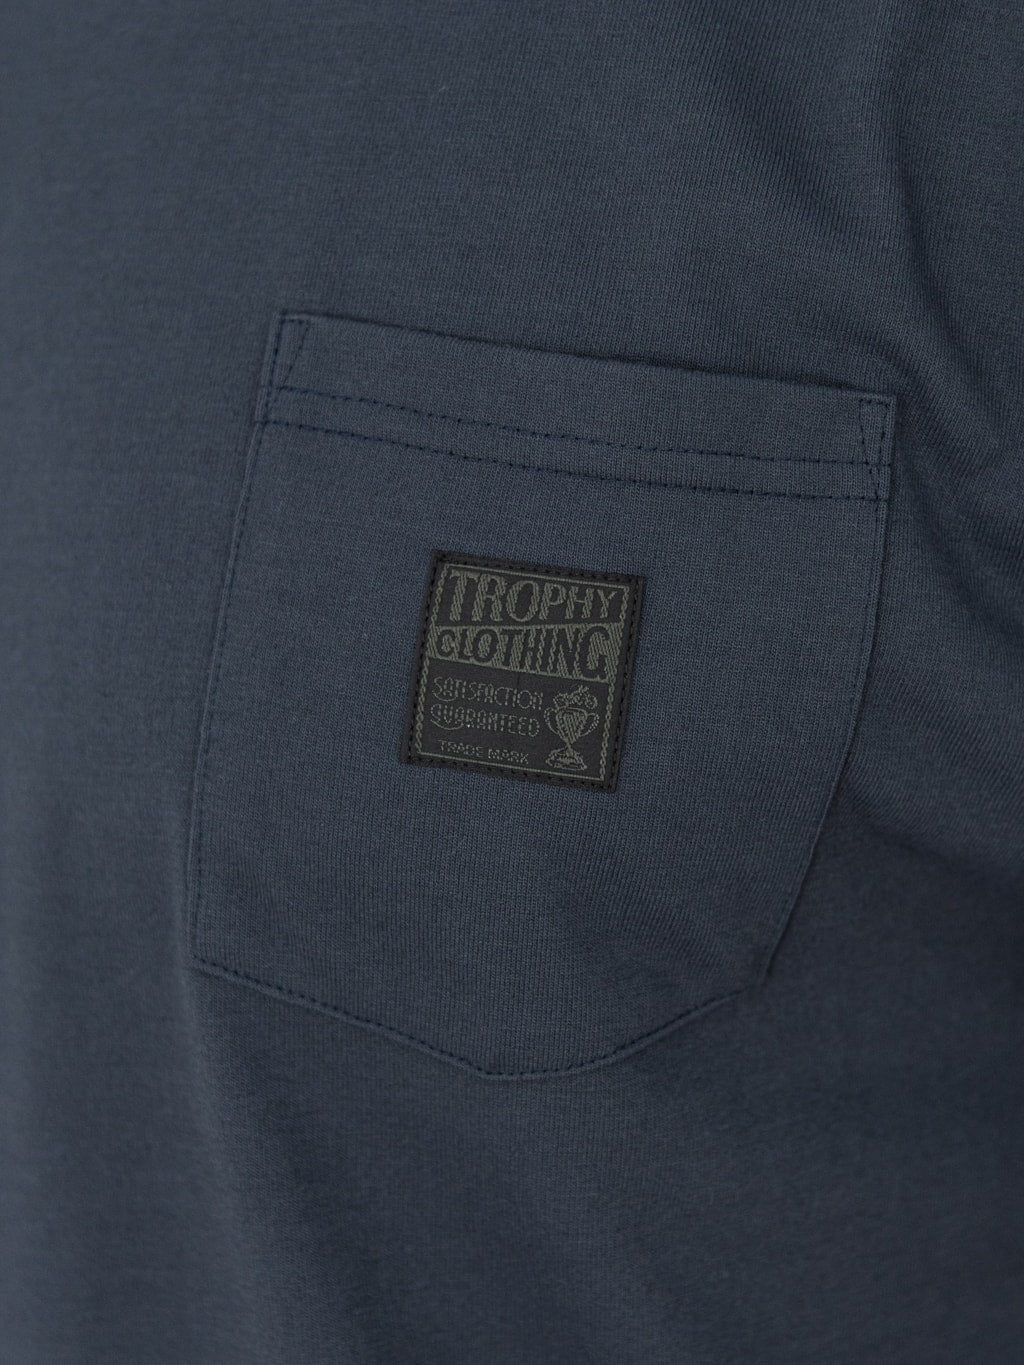 trophy clothing monochrome pc pocket tee charcoal  chest pocket logo